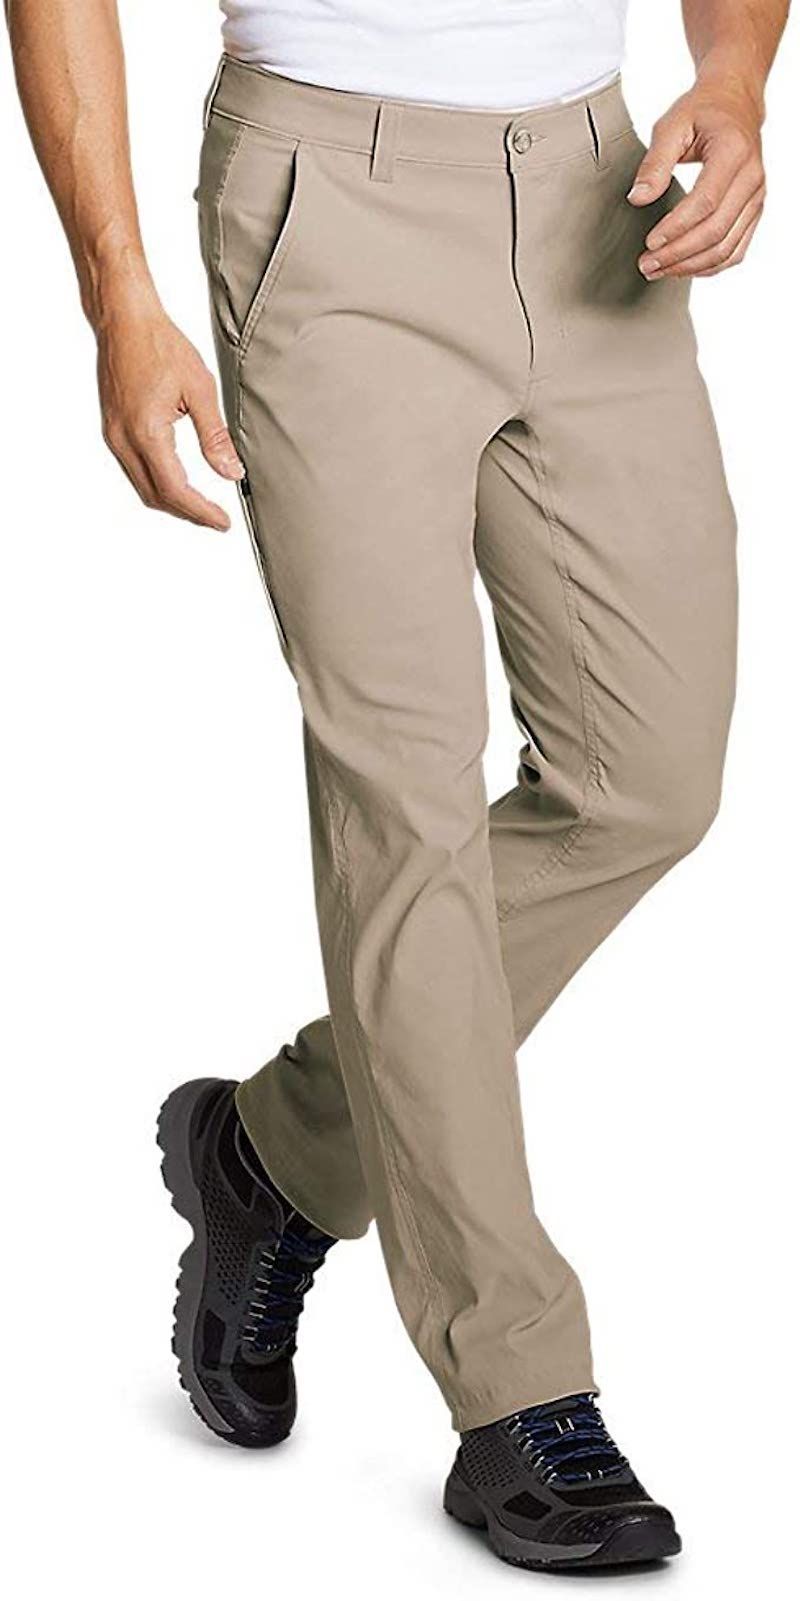 Mens Spring Summer 98 Cotton Pants Business Slim Elastic Casual Trousers  Black Khaki Fit Straight Pant at Amazon Mens Clothing store